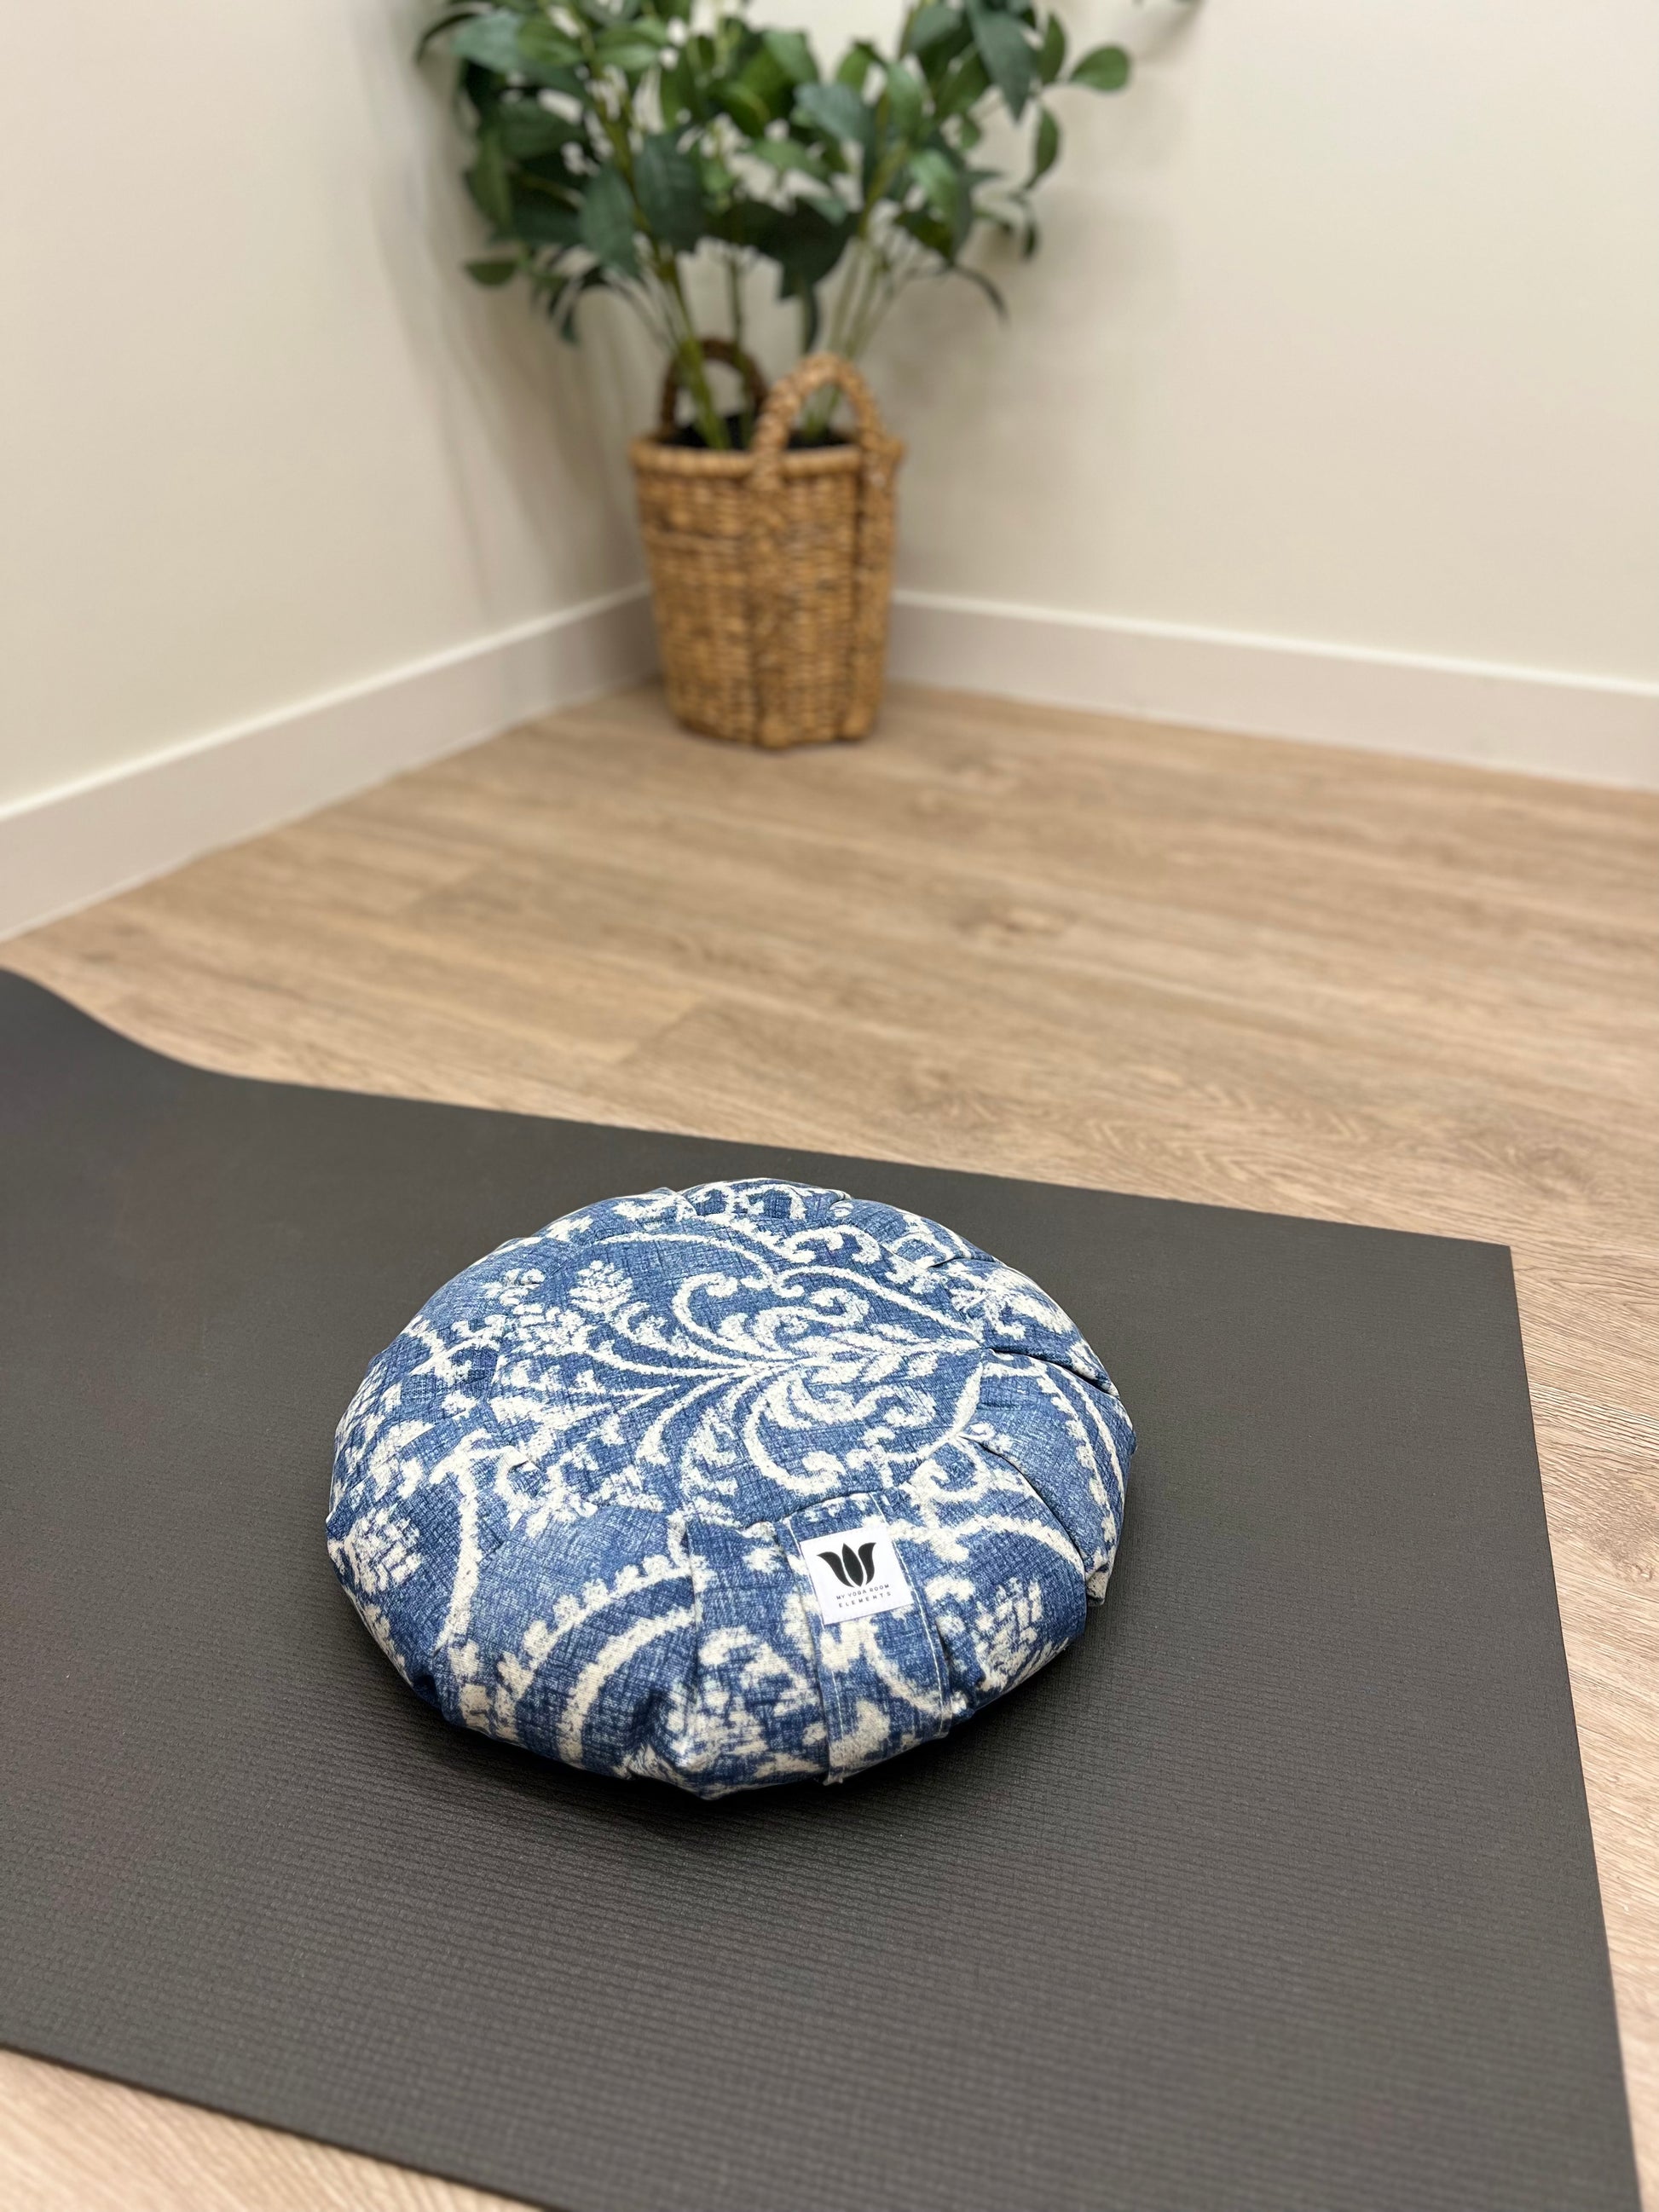 Meditation Seat Cushion in blue and white printed cotton canvas fabric, handcrafted in Canada by My Yoga Room Elements